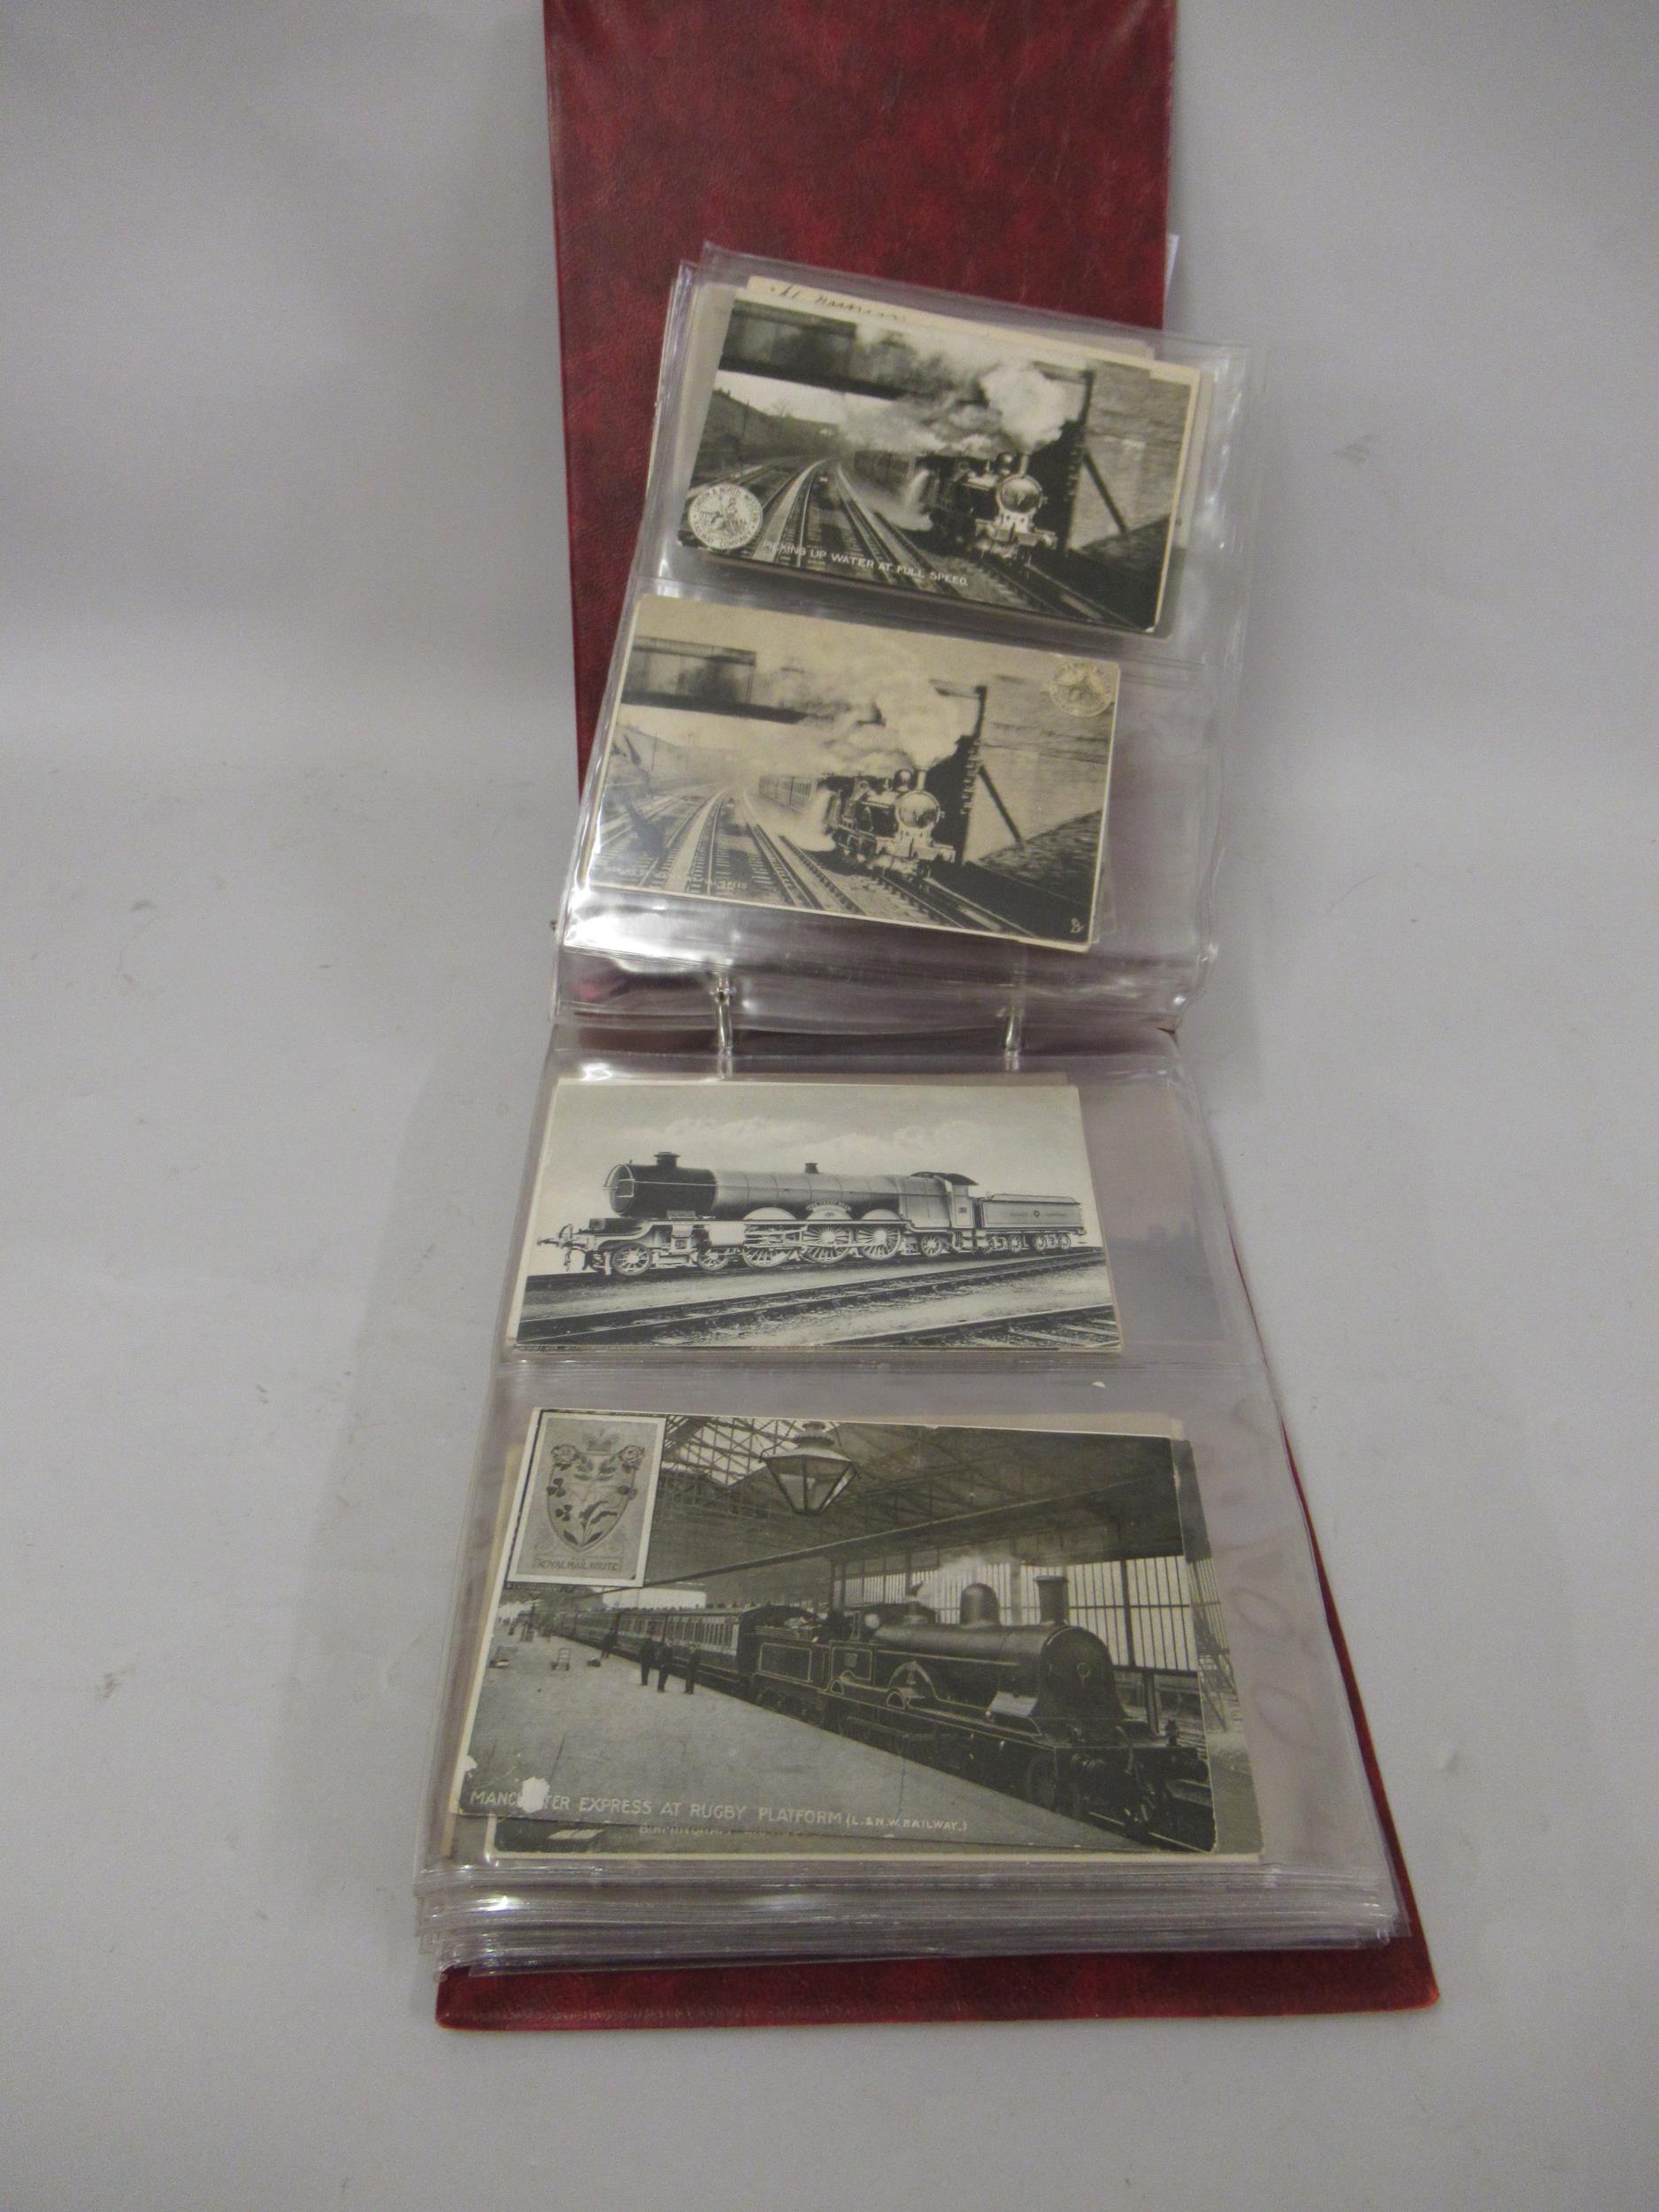 Album containing a collection of steam locomotive related post cards